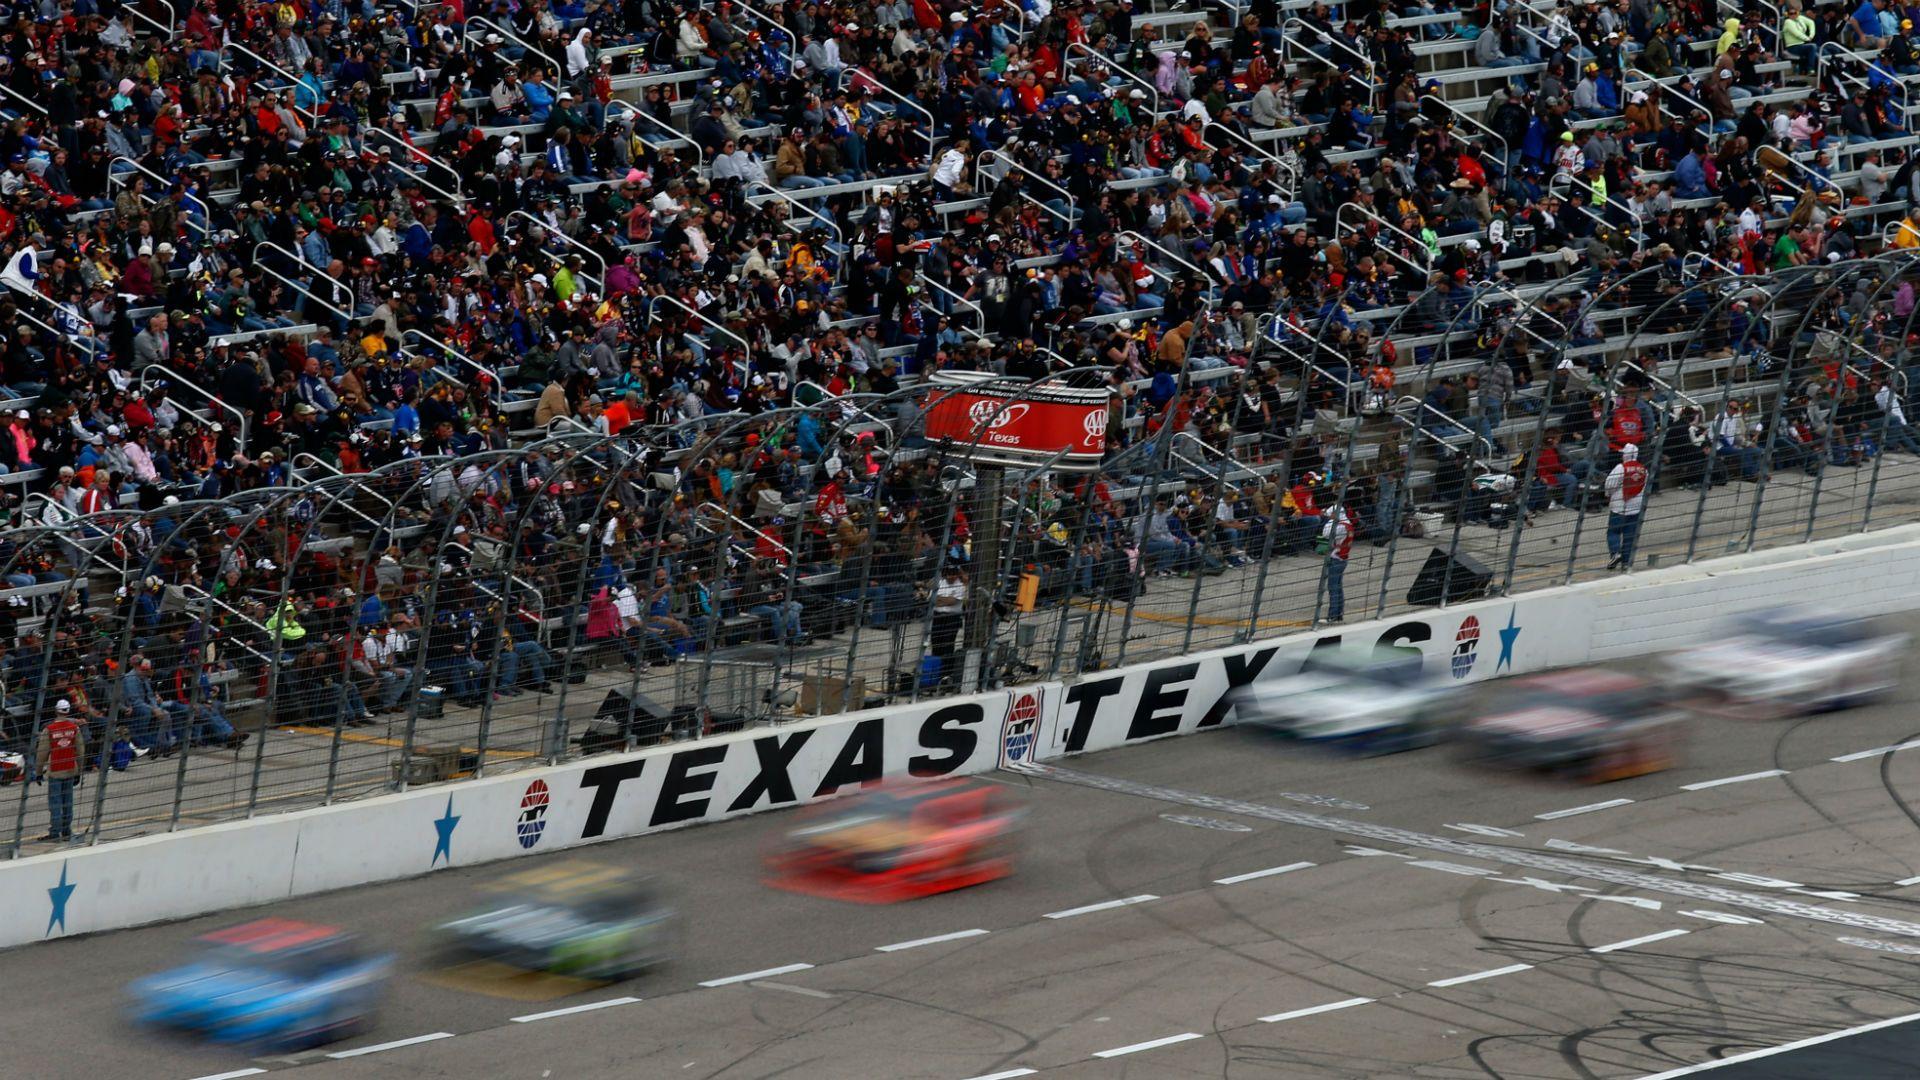 Tracks continue removing seats; how might fans be impacted?. NASCAR